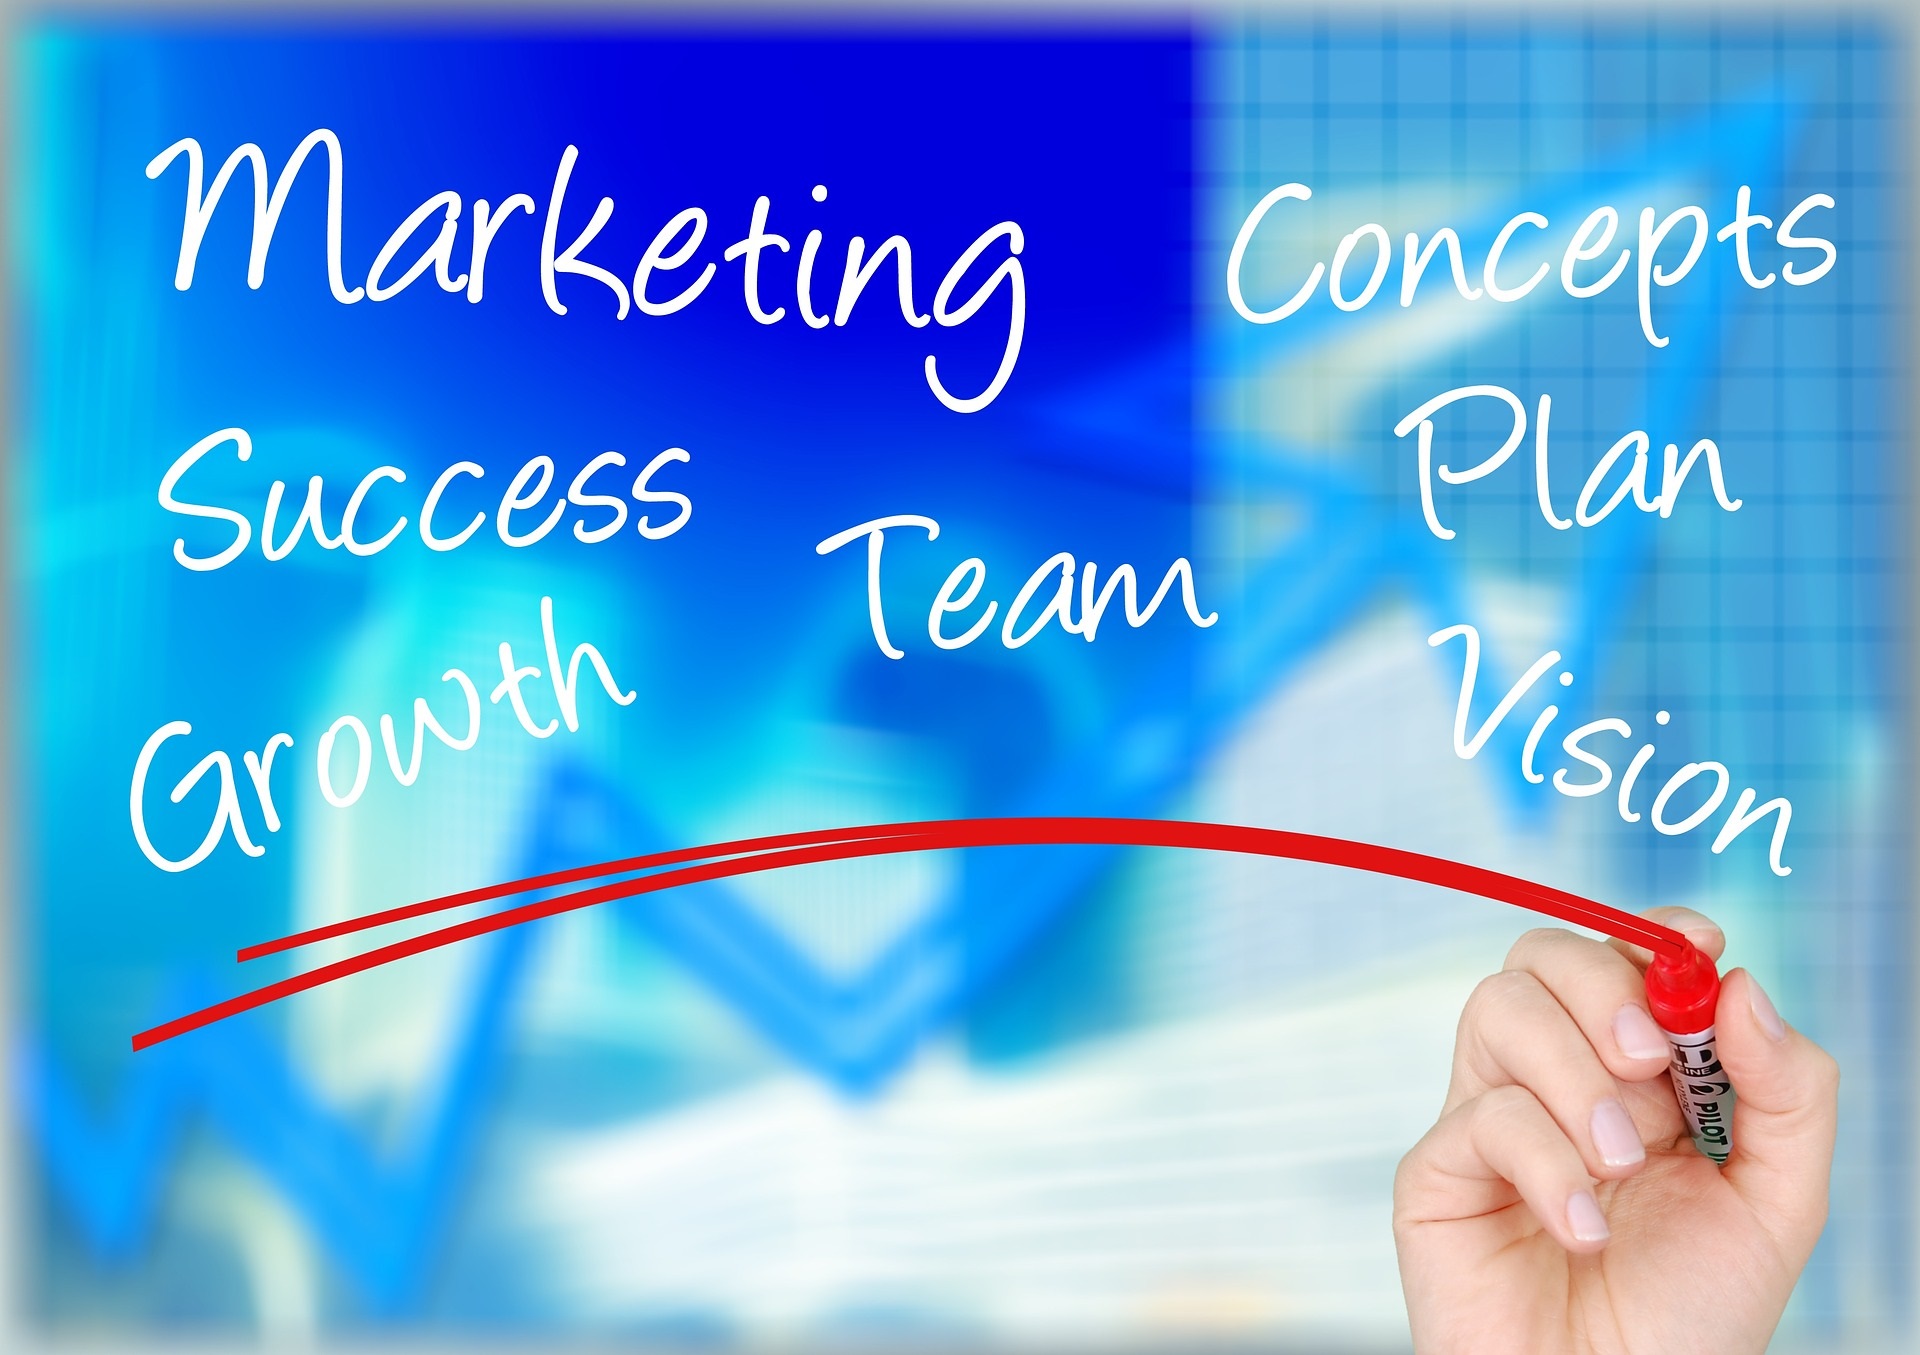 How to Achieve Business Success with Internet Marketing Strategies